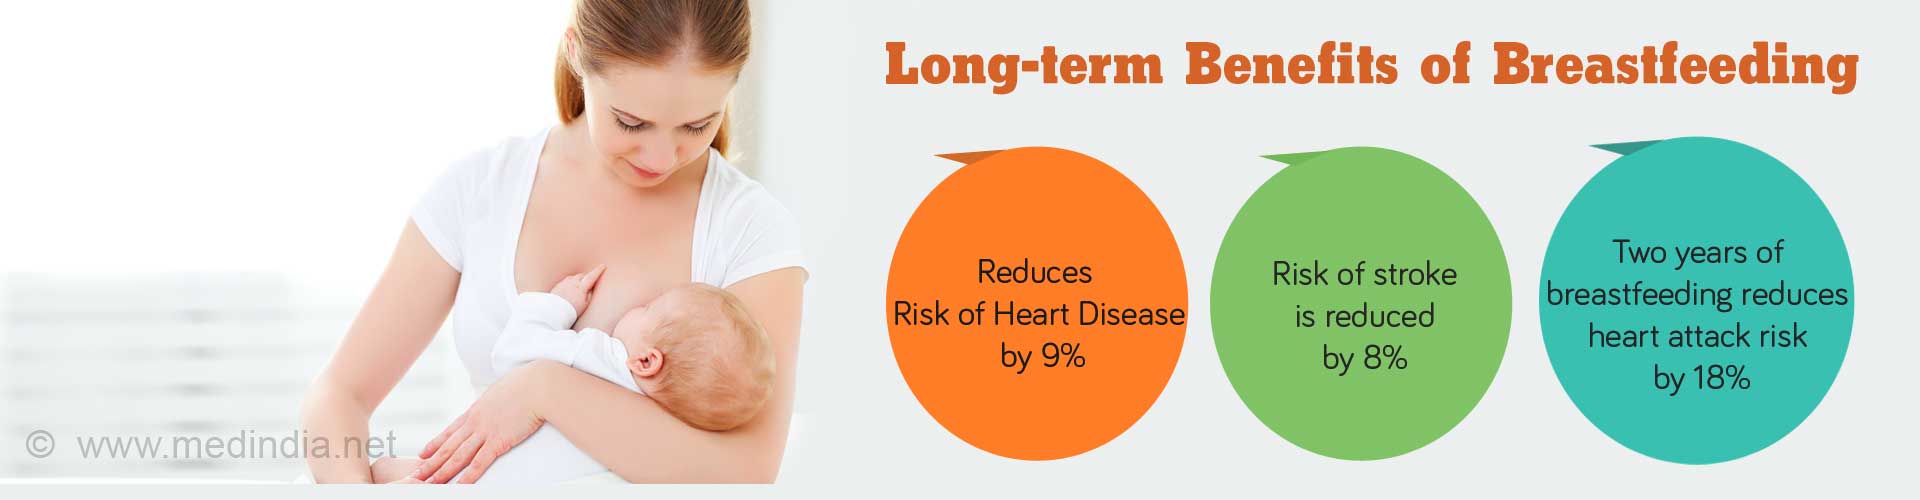 Long-term benefits of breastfeeding
- Reduces risk of heart disease by 9%
- Risk of stroke is reduced by 8%
- Two-years of breastfeeding reduces heart attack risk by 18%
